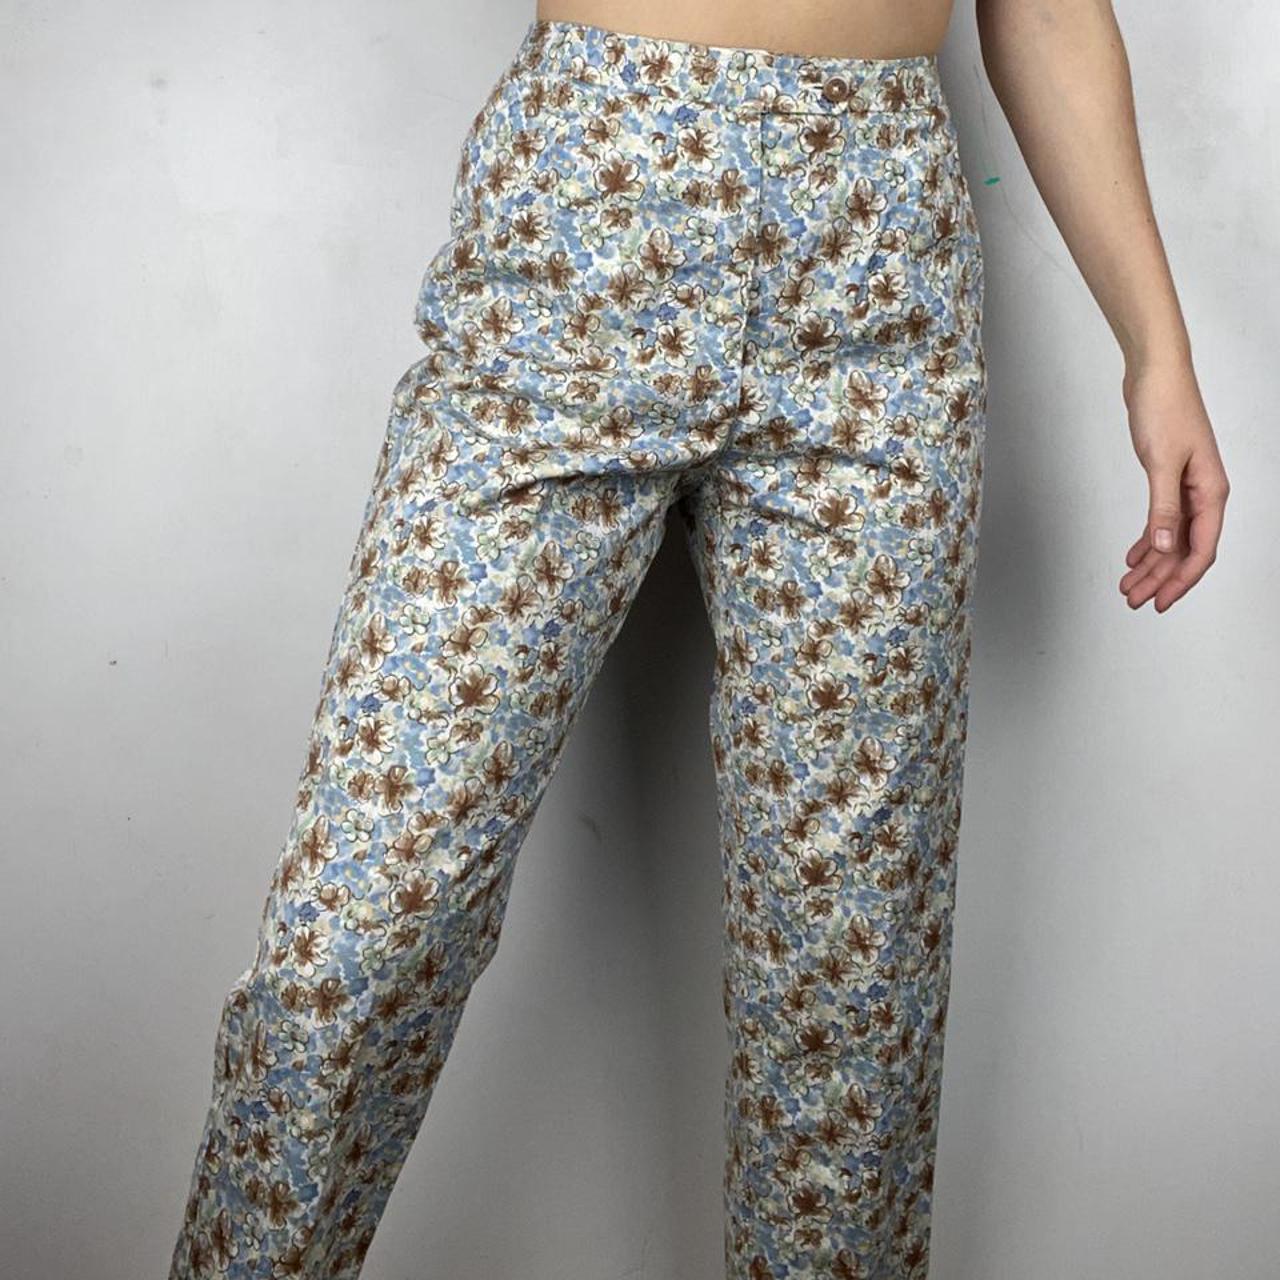 Product Image 3 - Vintage High Waisted Patterned Pants🪐
These